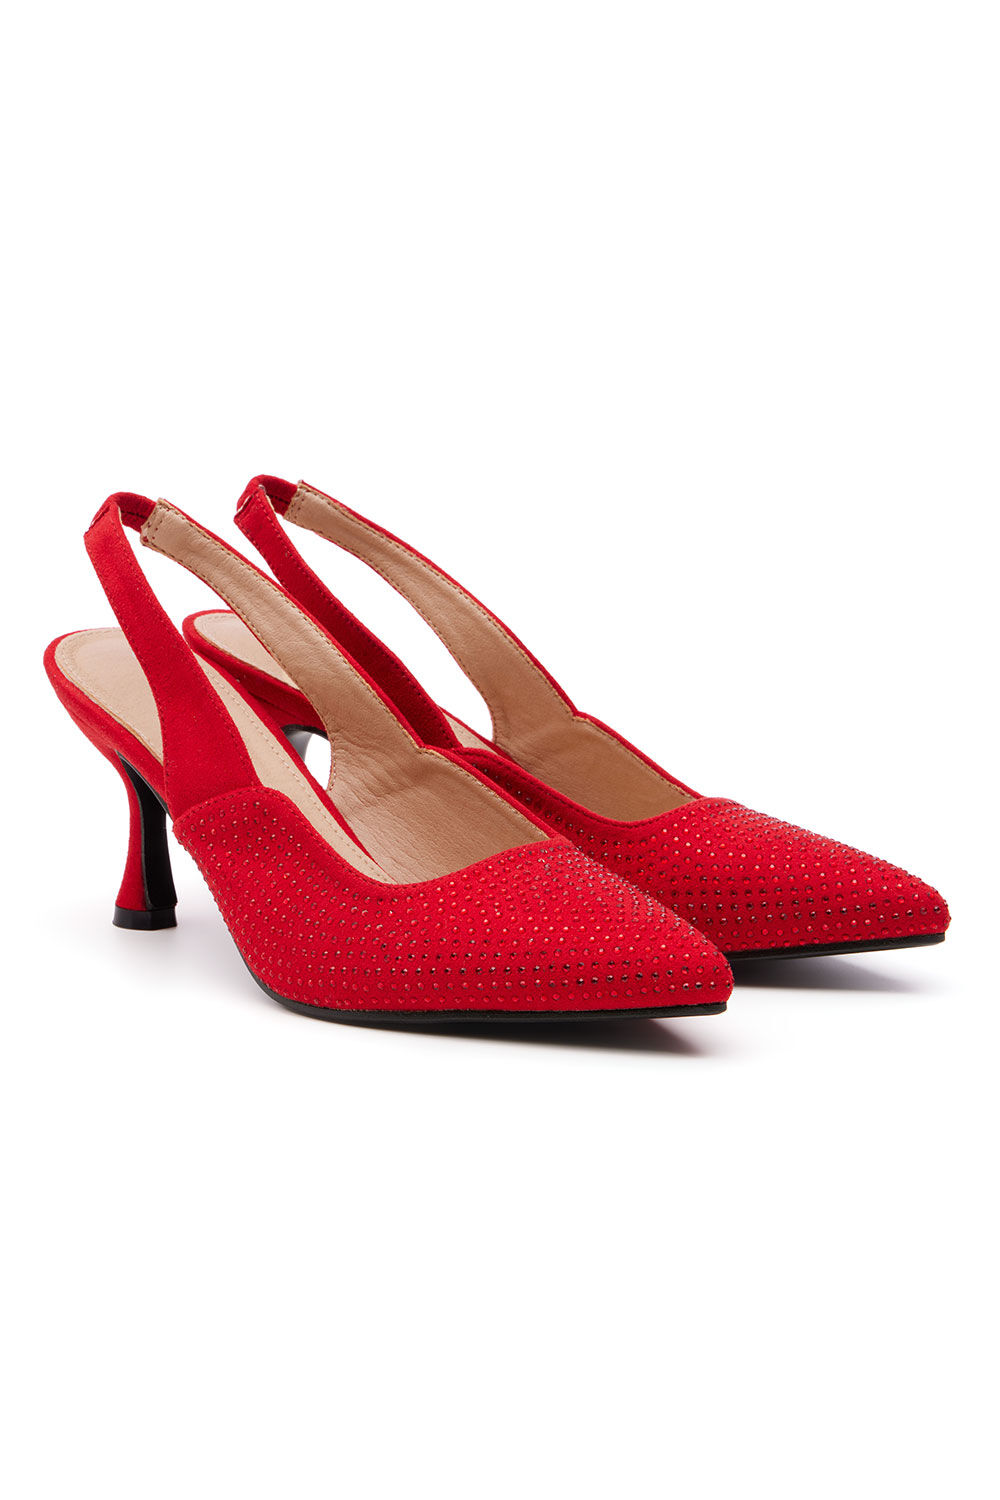 Comfort Plus Red - Strap Design Heels With Diamante Detail, Size: 4